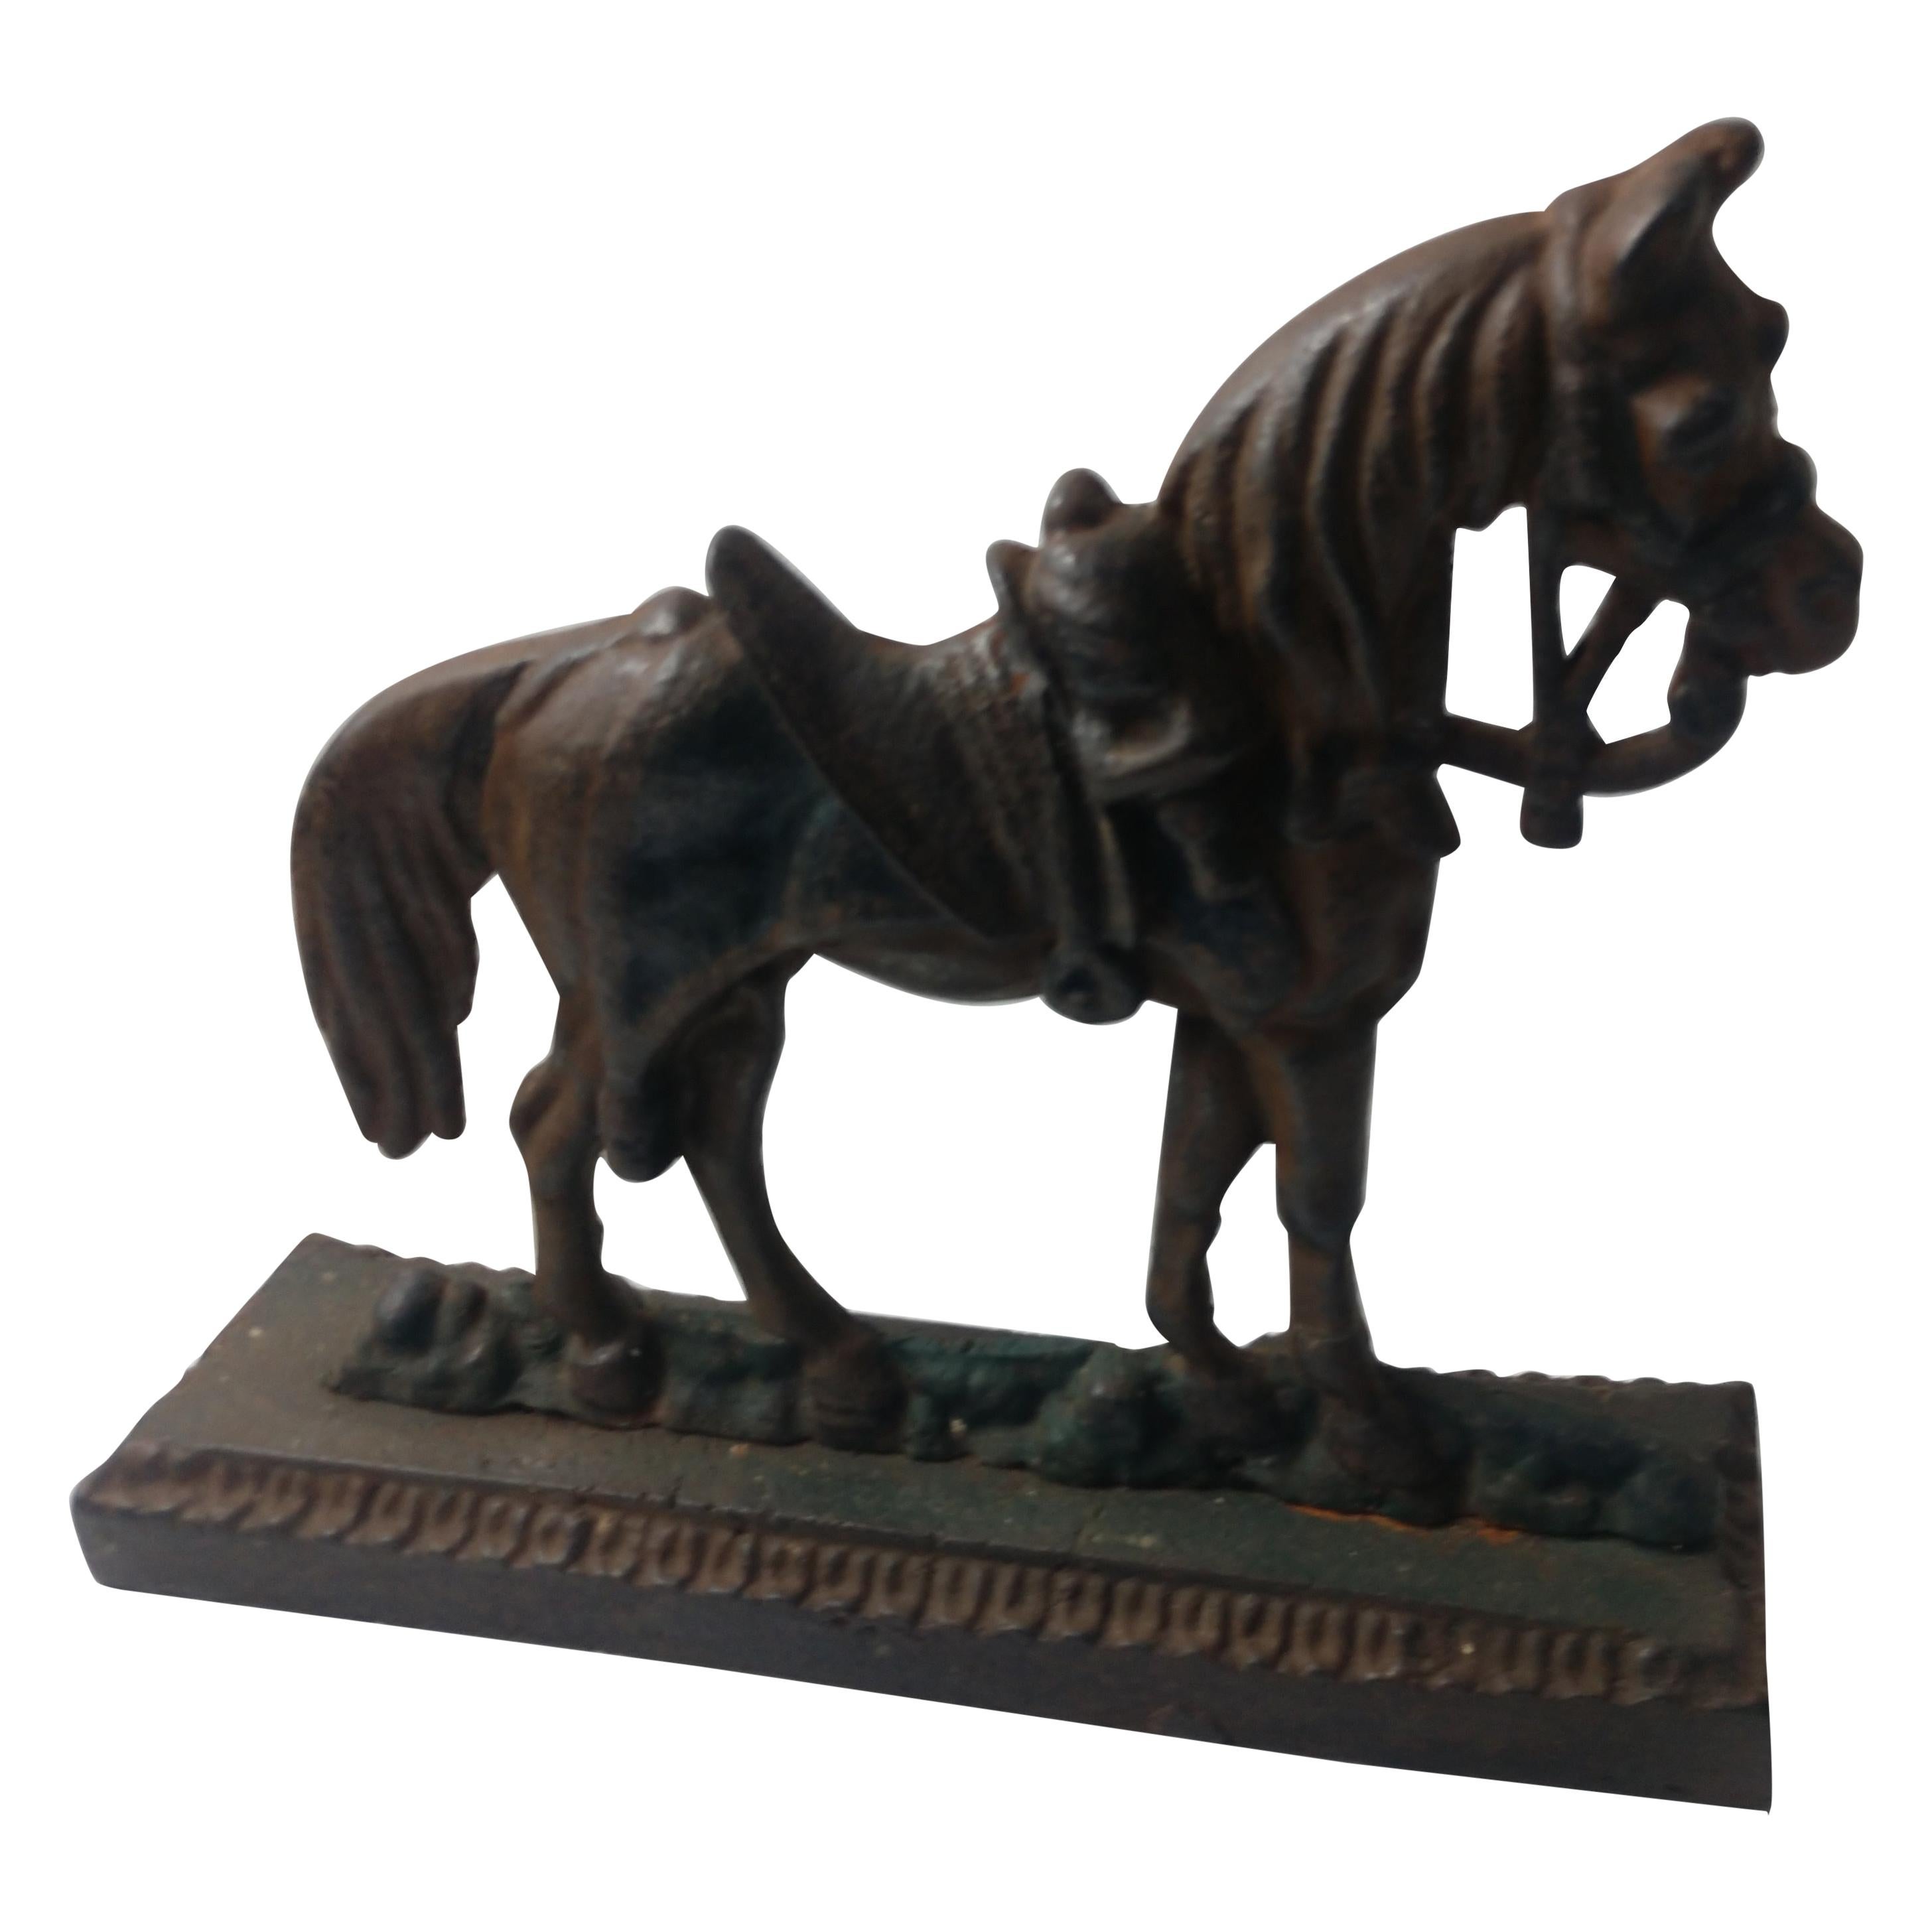 Cast Iron Doorstop of a Horse with Full Gear, circa 1940